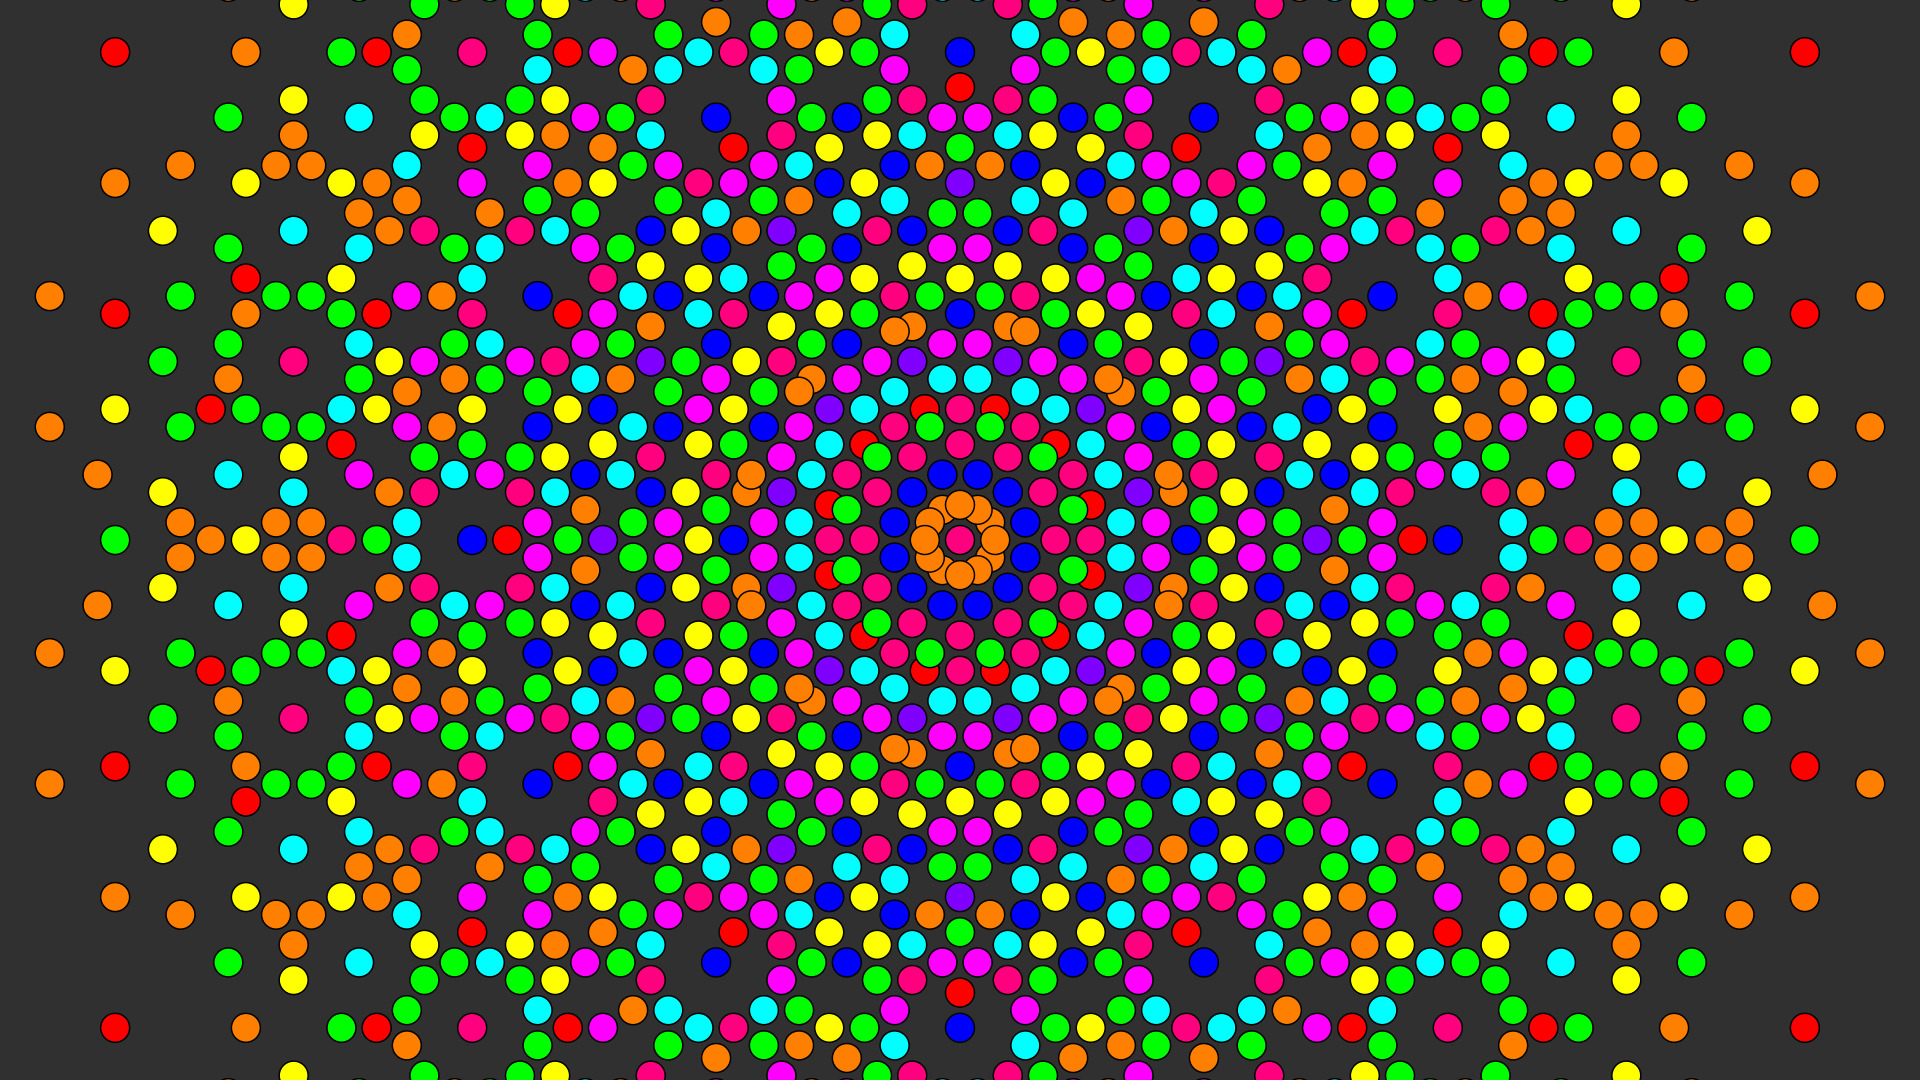 psychedelic, Colorful, Circle, Artwork, Abstract, Symmetry Wallpaper